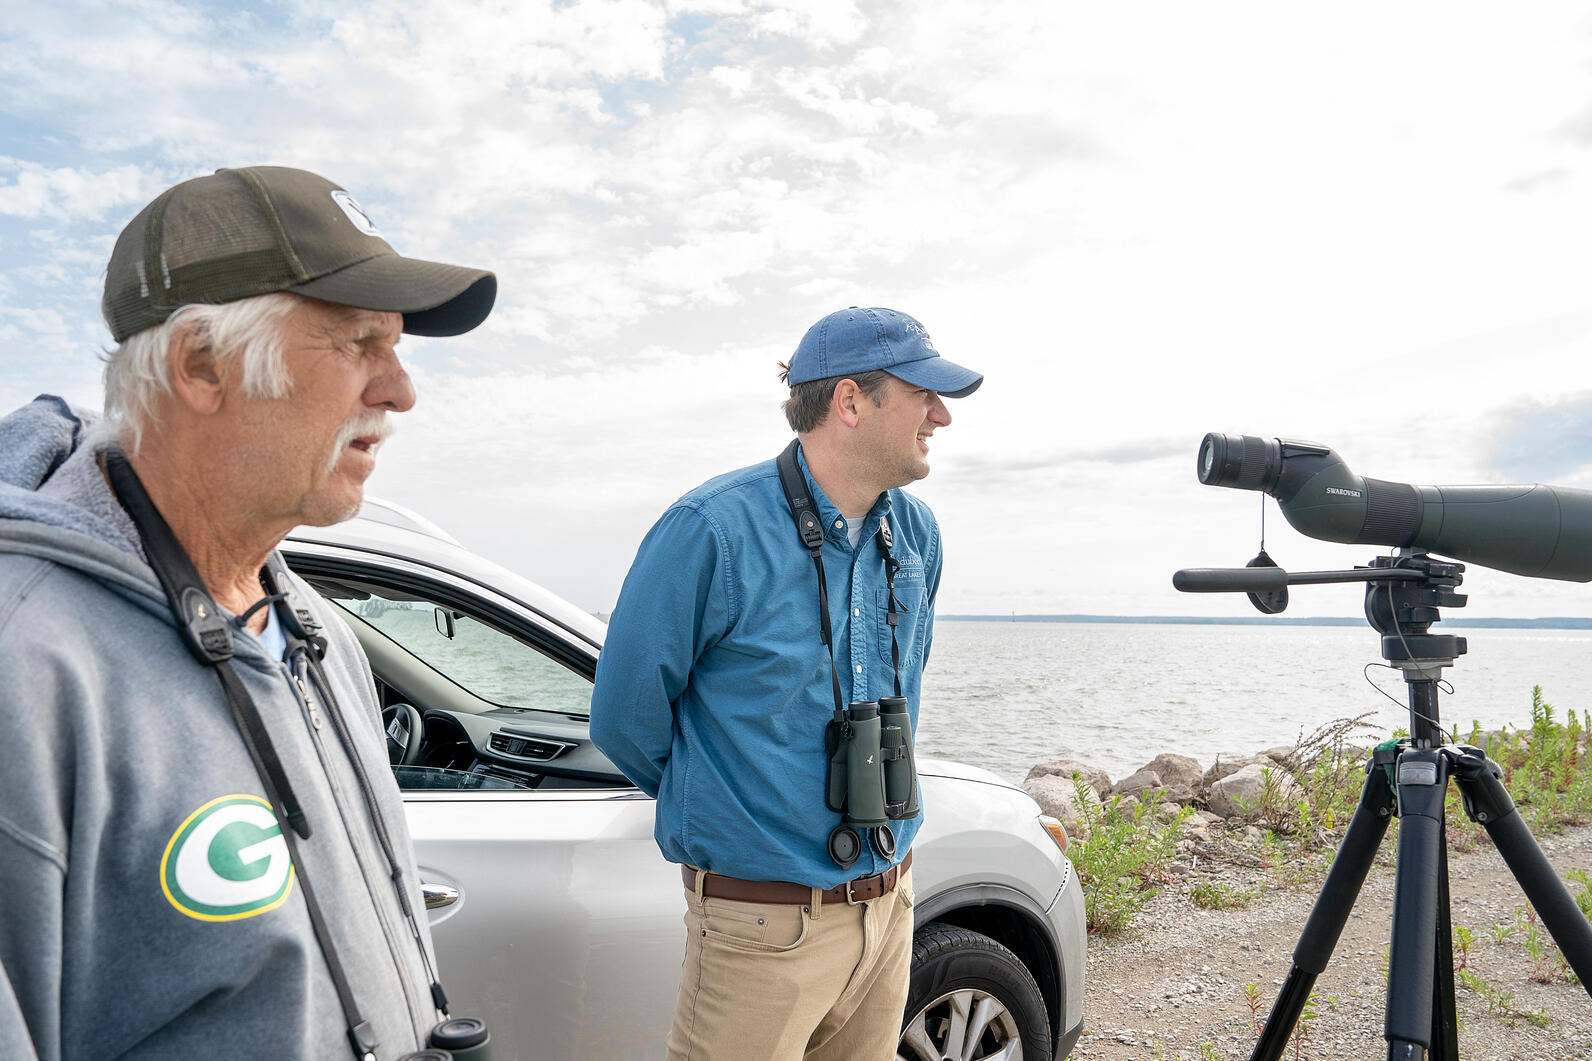 Tom Prestby, Conservation Manager at Audubon Great Lakes and Volunteer Bird Monitor watch over Great Lakes Piping Plovers. Monitors and volunteers at nesting sites spend hours each day checking on the birds, educating beachgoers, and protecting plovers fr